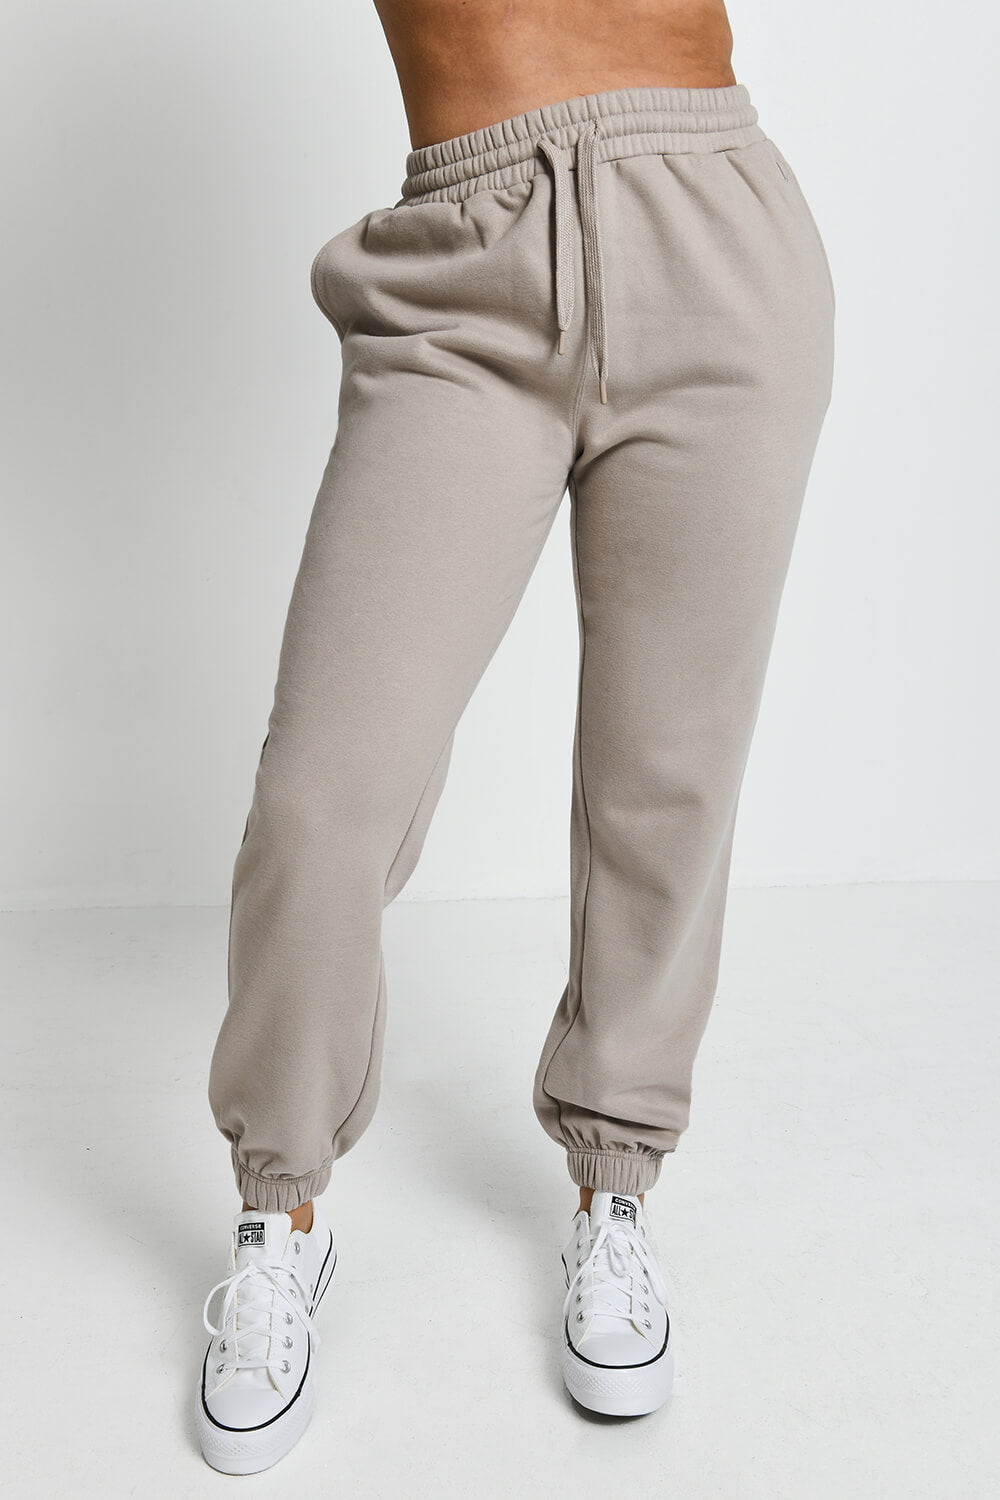 Tall Joggers - Women's Tall Tracksuit Bottoms - LOVALL